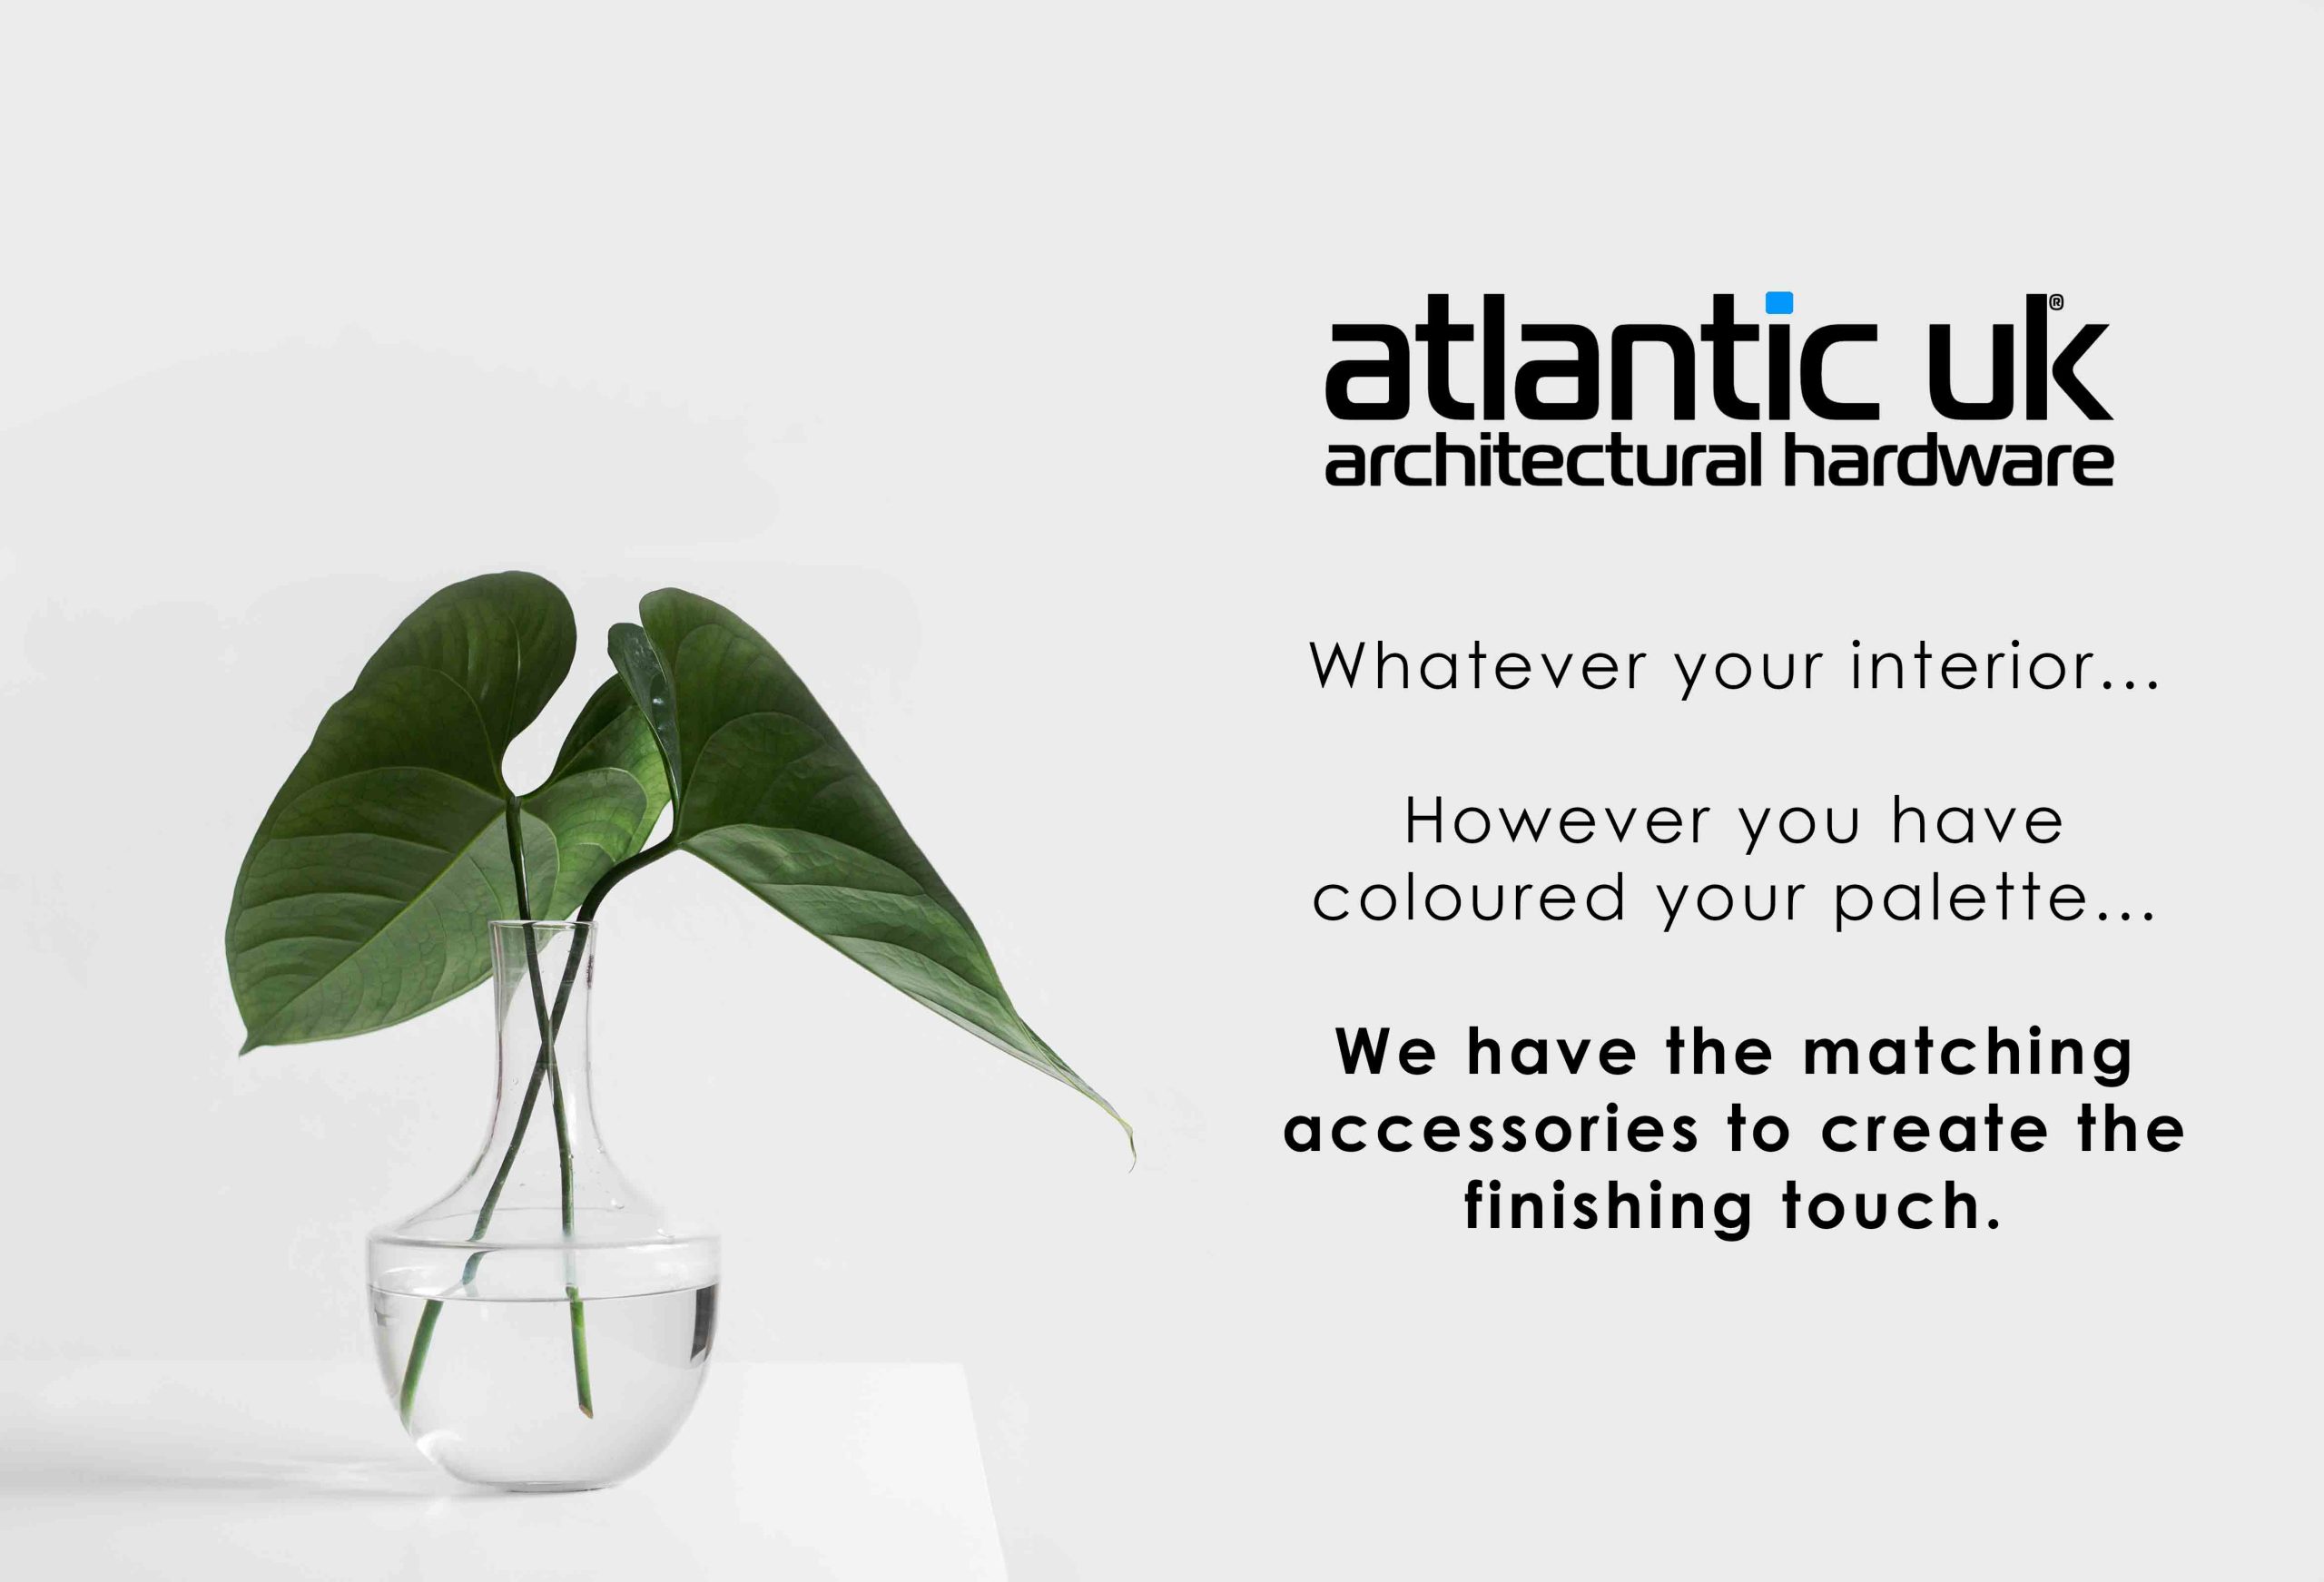 We help create the finishing touch! image